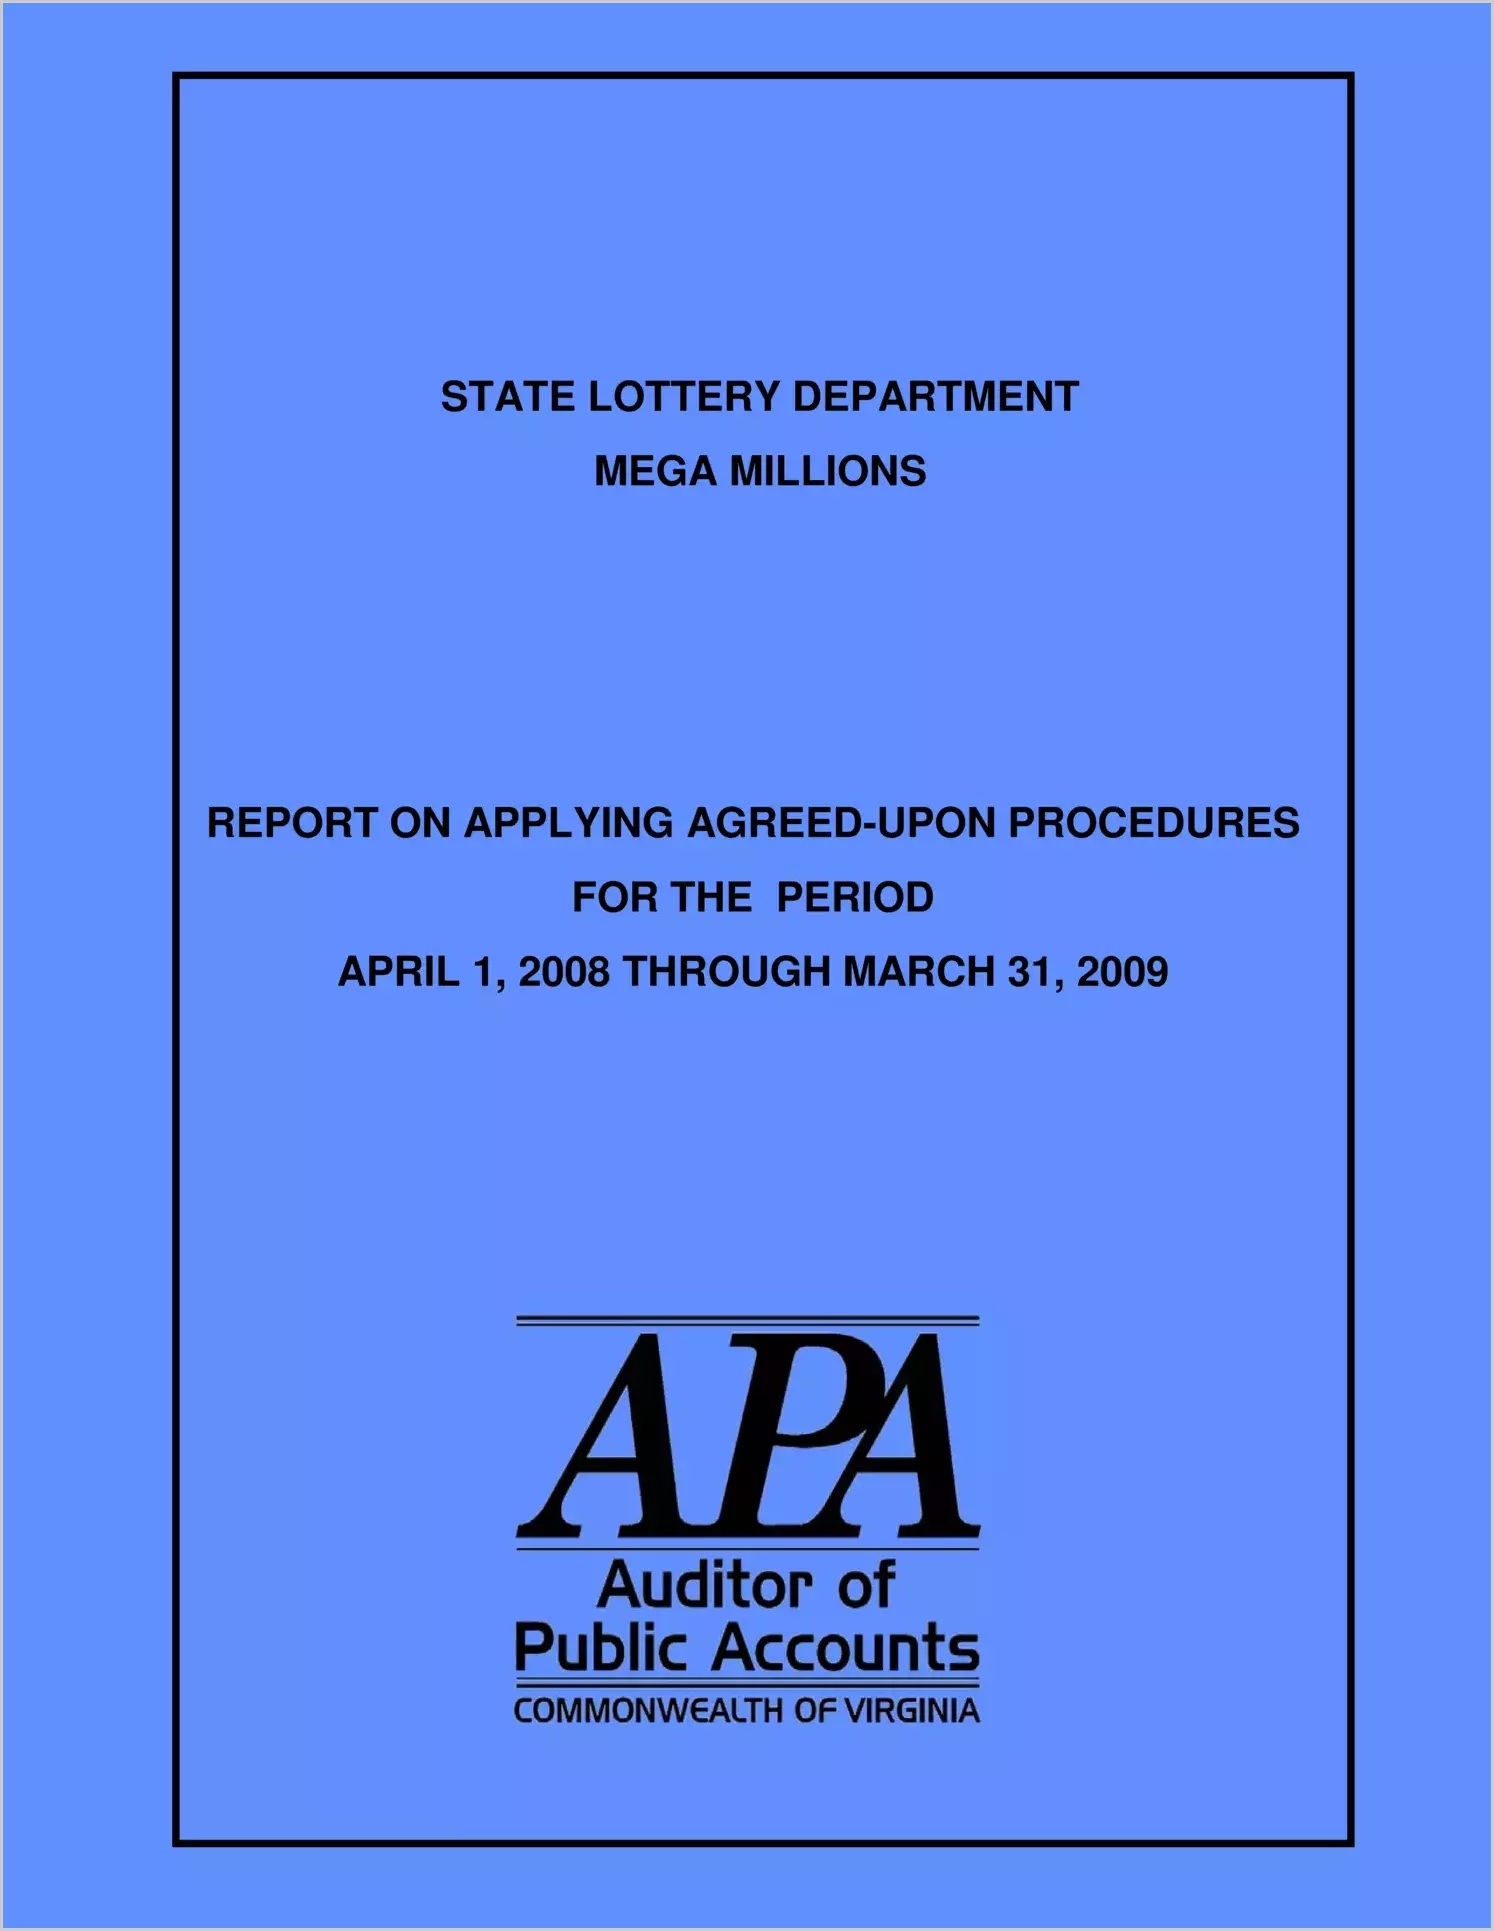 State Lottery Department Mega Millions report on Applying Agreed-Upon Procedures (MegaMillions) for the period April 1, 2008 throuhg March 31, 2009